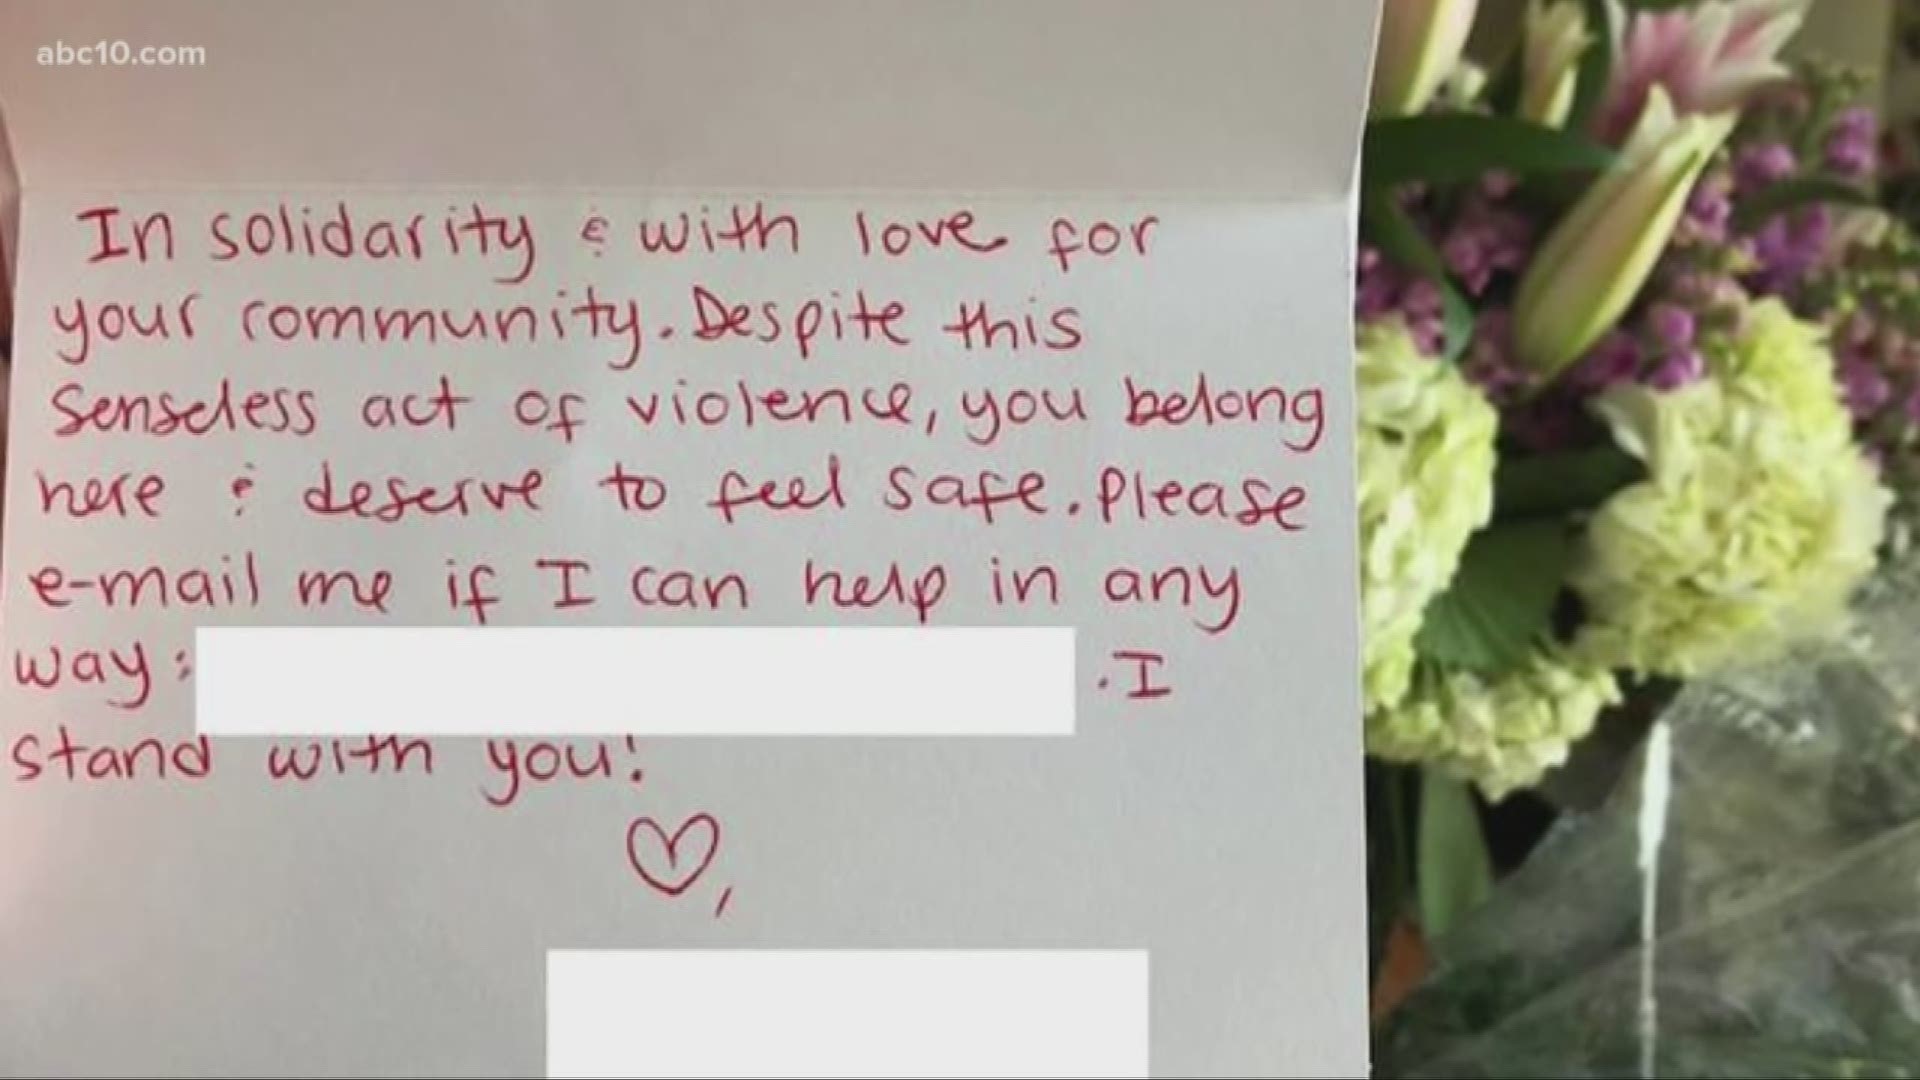 After a shooting that killed 50 in New Zealand, the Folsom Muslim community received an outflow of support in the form of cards, flowers, and letters that  reminded them that their neighbors in the city are there to support them in difficult times.